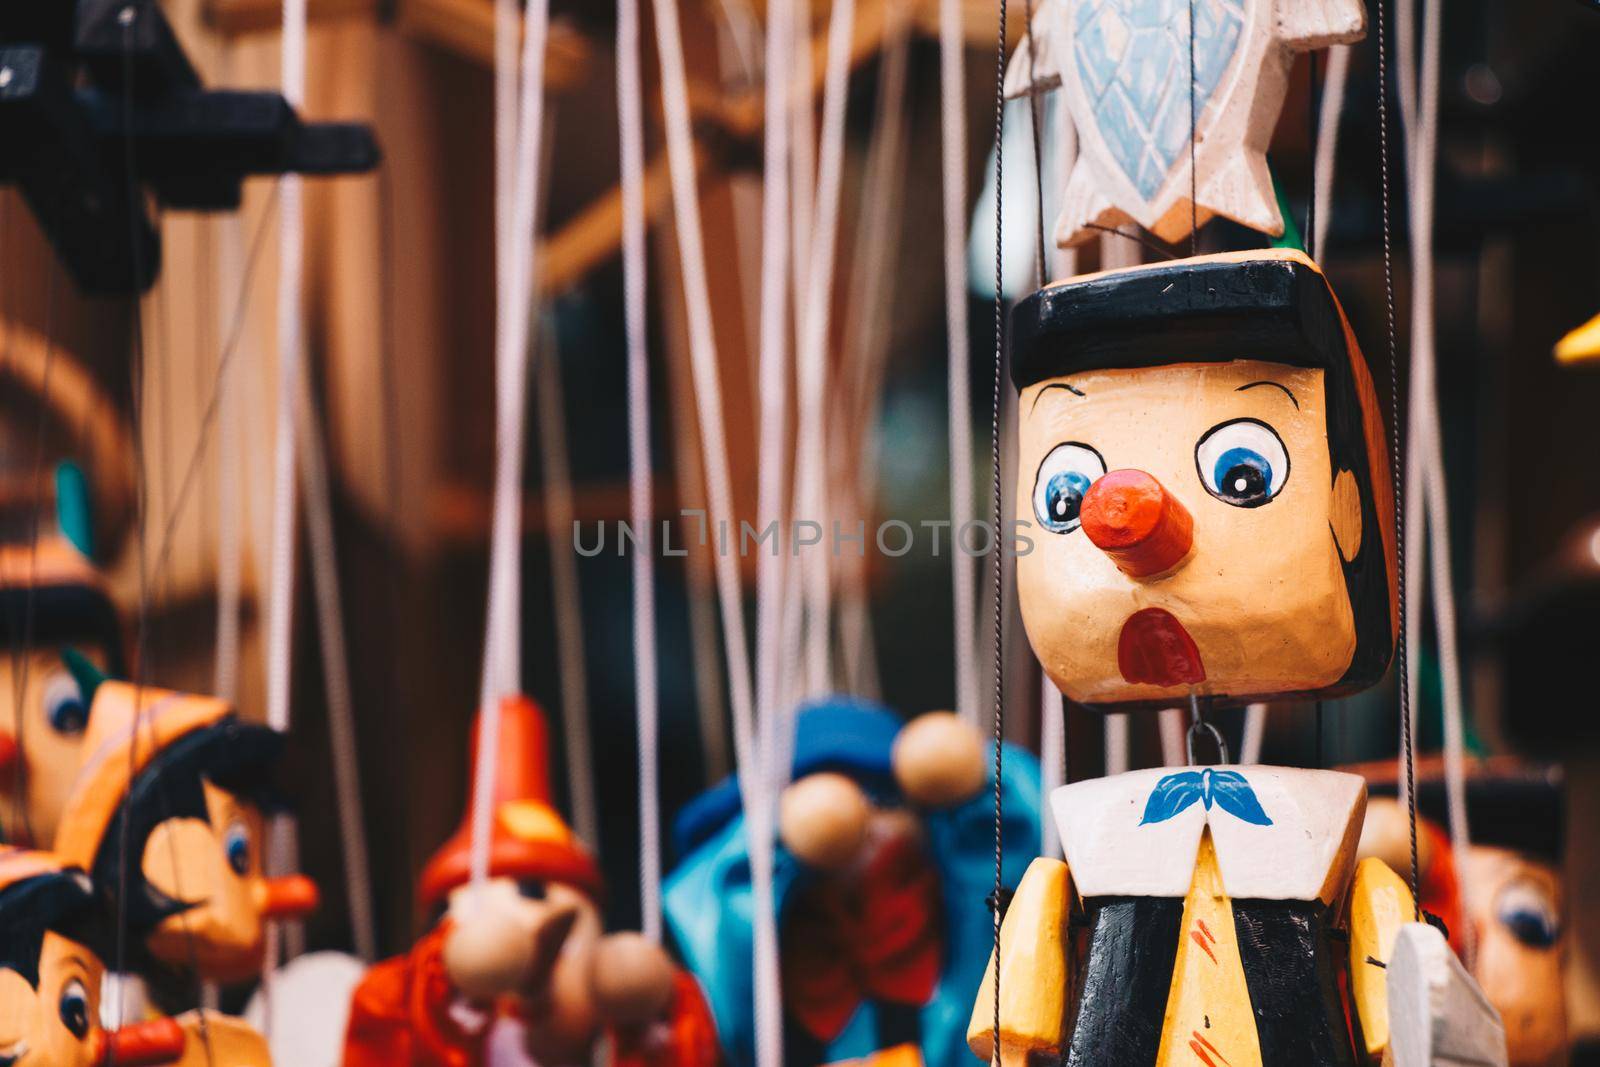 Wooden pinocchio doll with his long nose by berkay